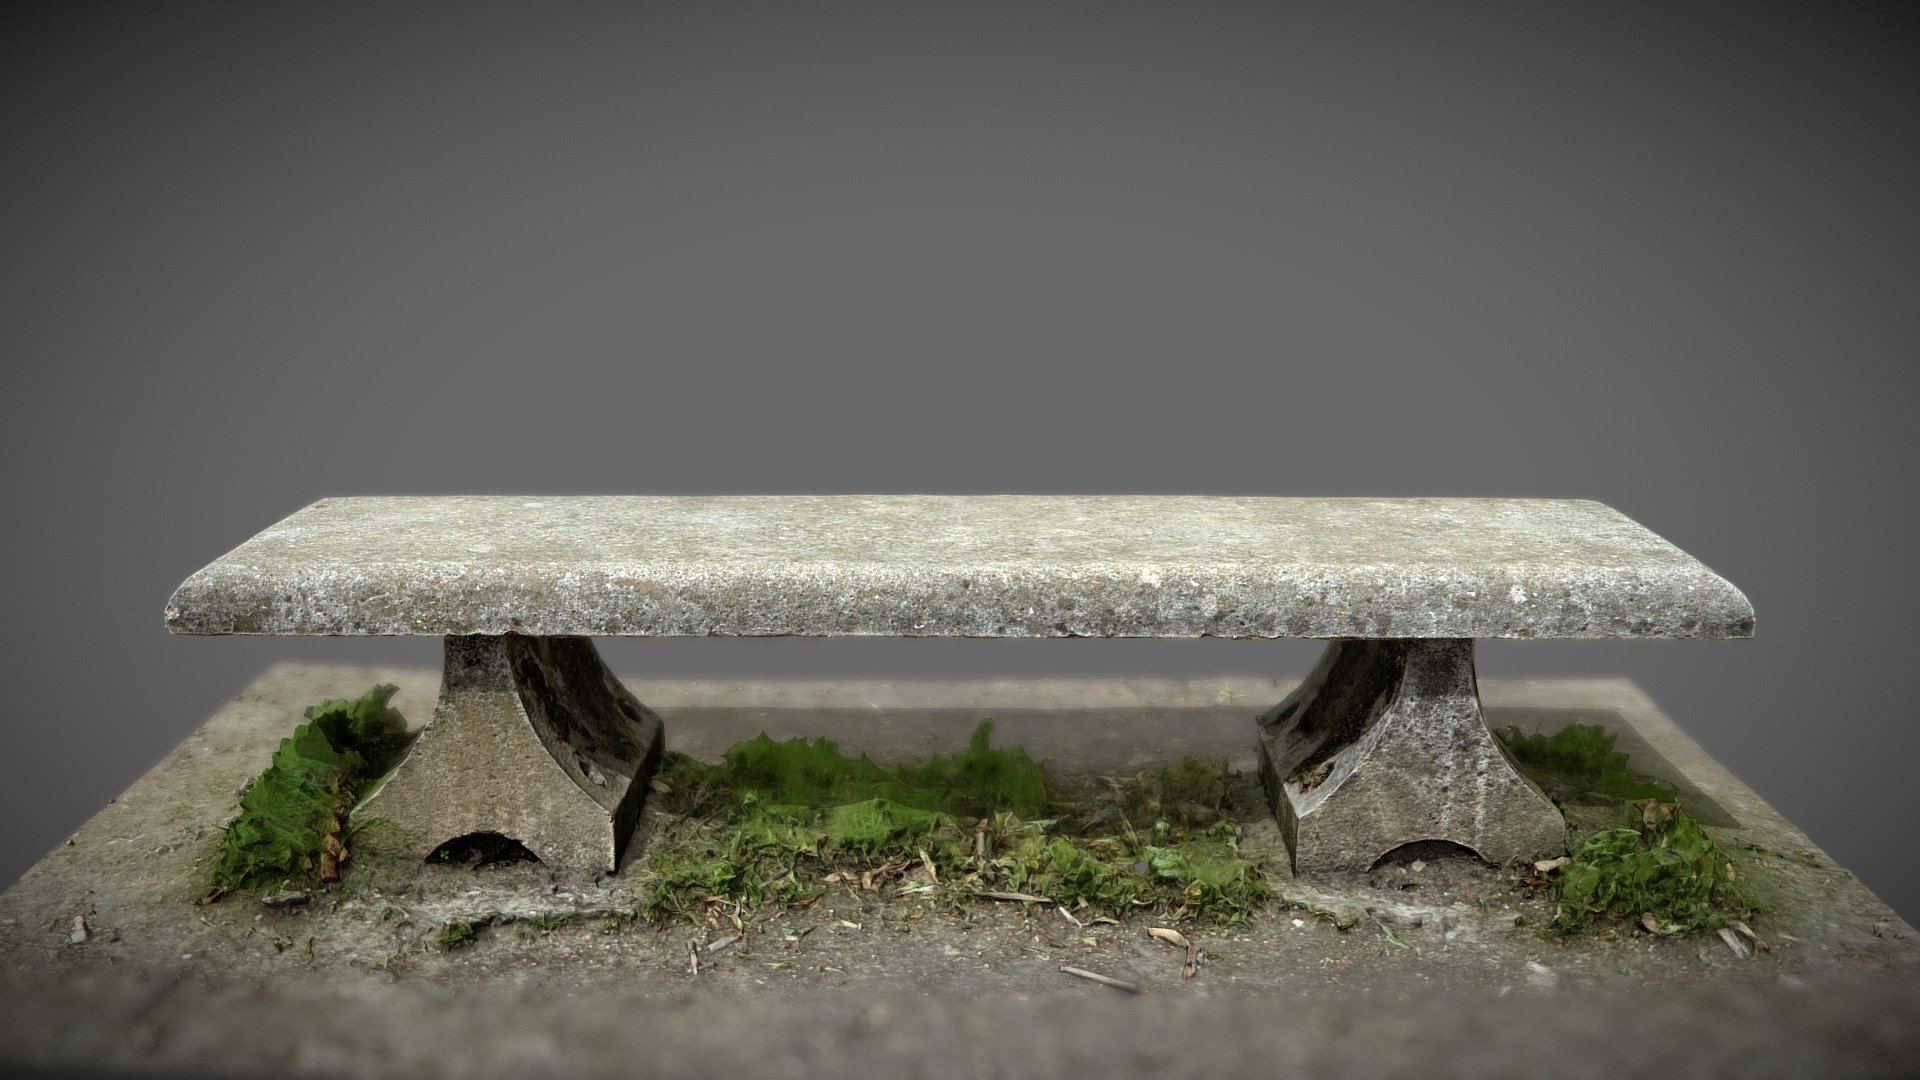 Scan of an old concrete bench in a Paris park.
Photogrammetry scan of 76 pictures only.
4K textures PBR 3d model